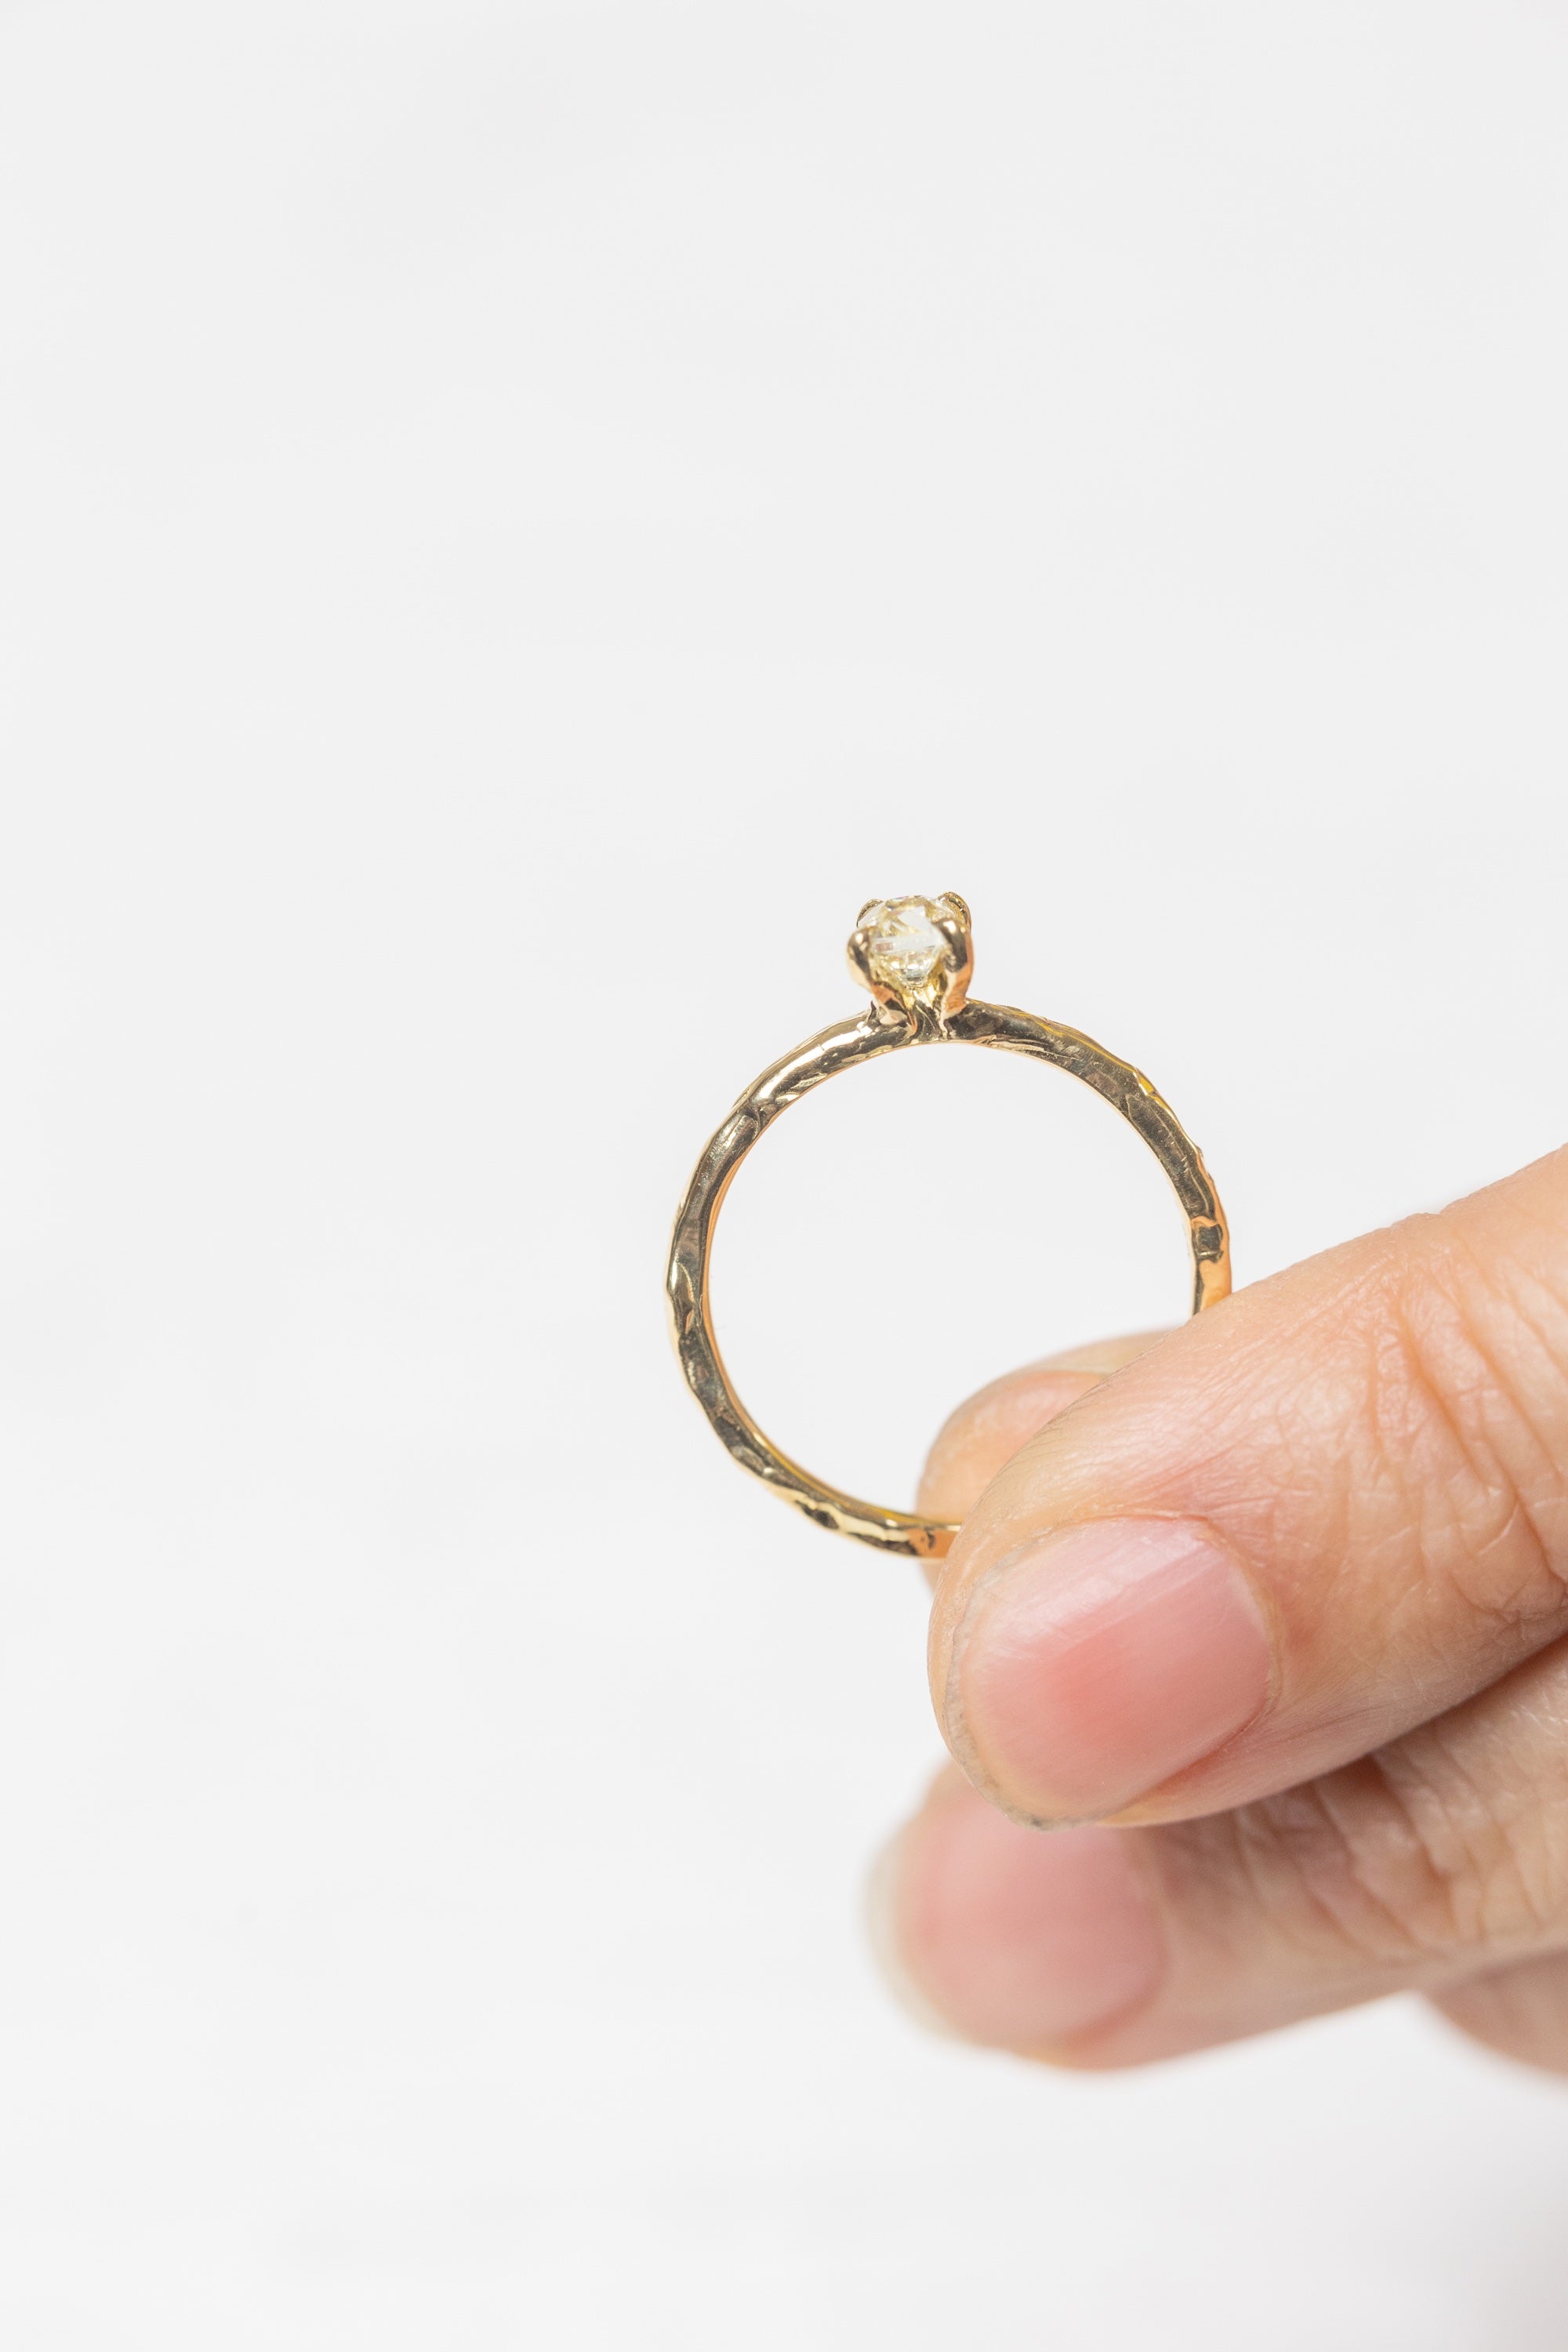 Leslie | Antique Diamond Ring on a 18k Textured Band